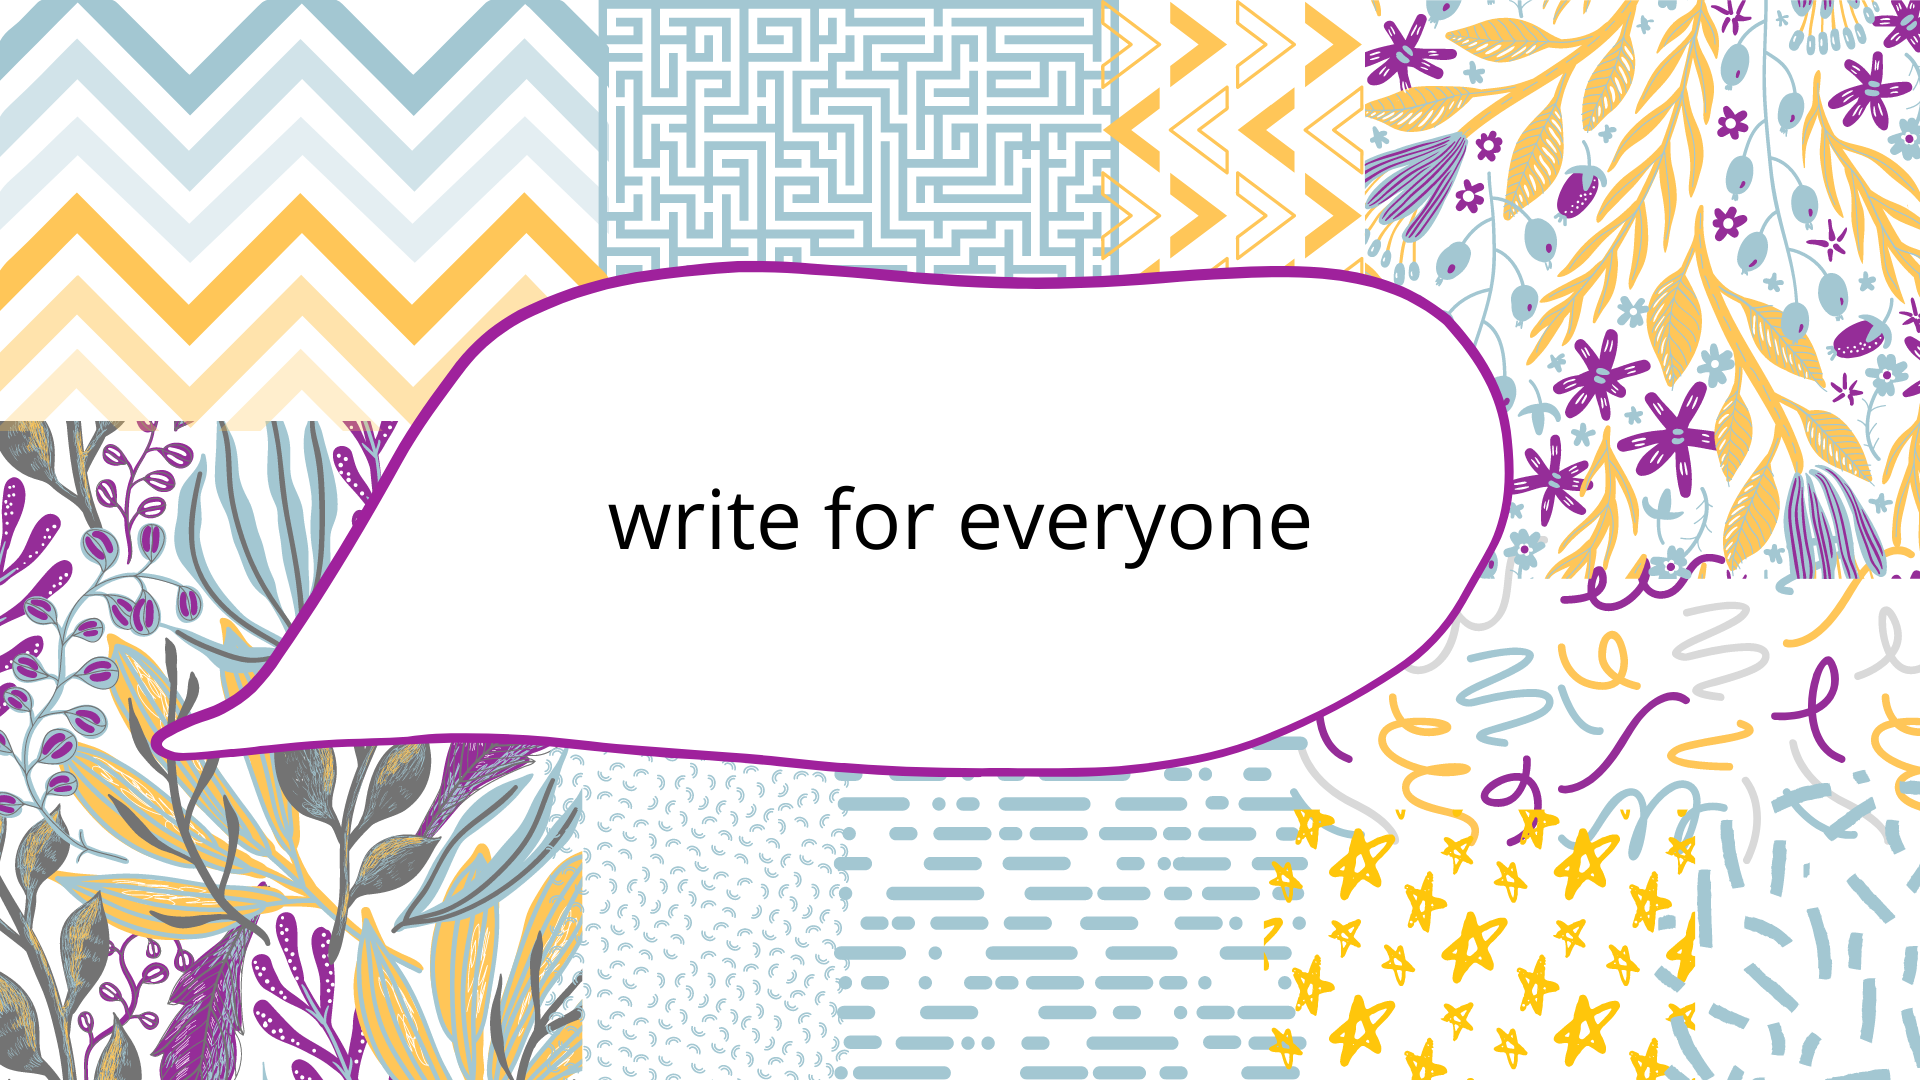 A speech bubble that says “write for everyone” over a colourful, multi-pattern background.